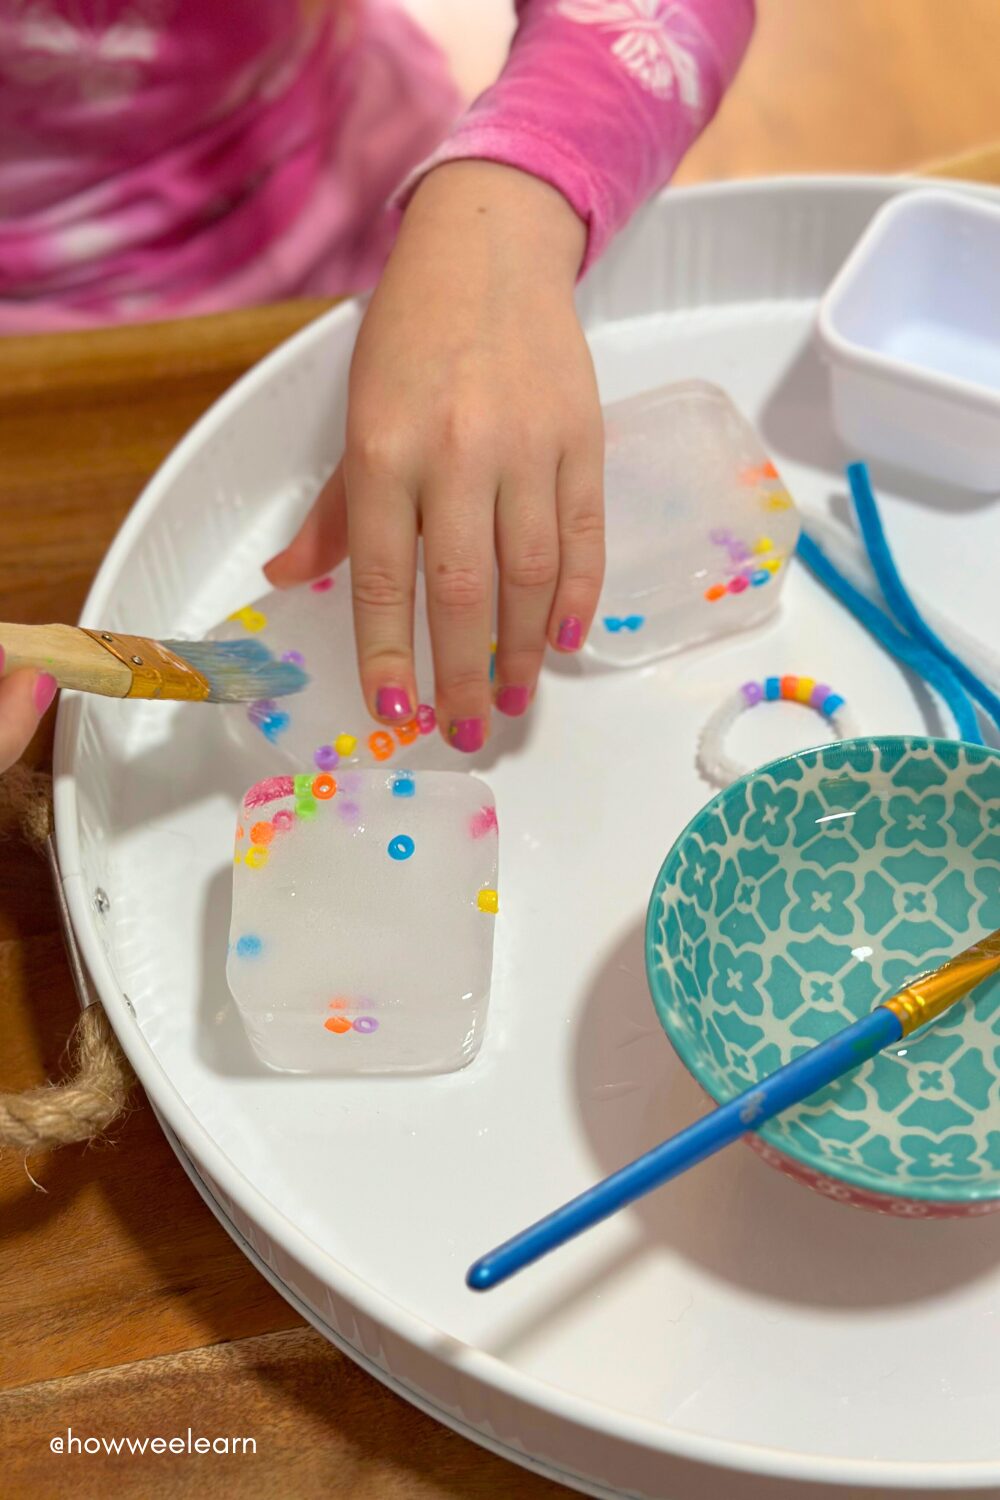 Free the beads sensory play ideas for preschoolers